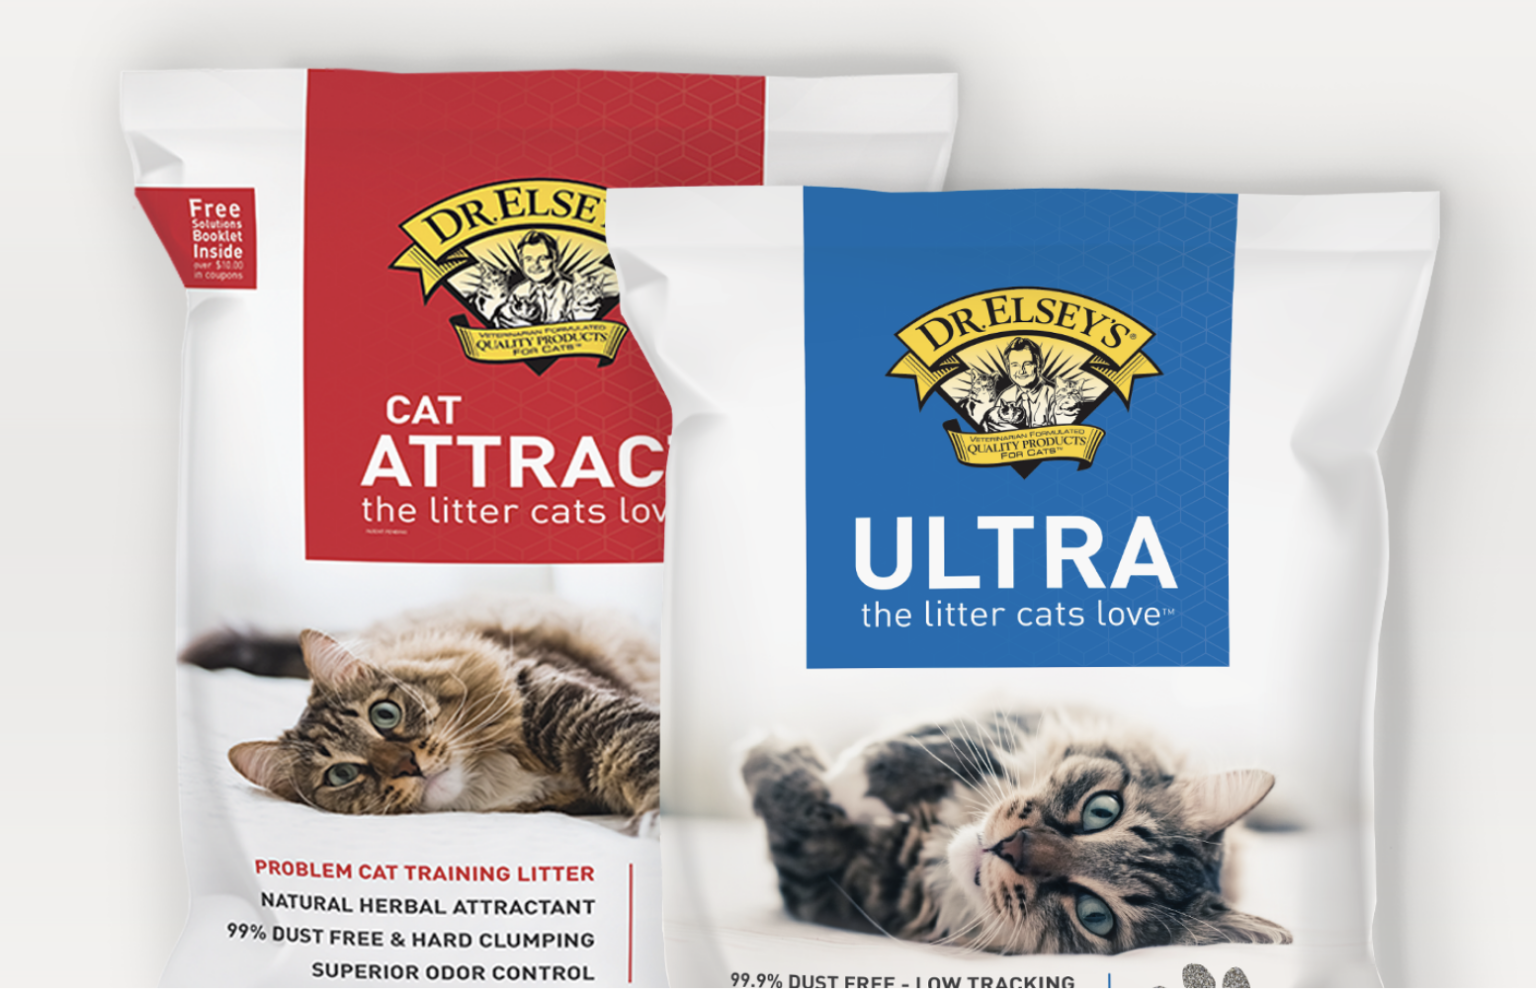 FREE Dr Elsey s Precious Cat Litter 40 Pound Bag After Rebate 20 